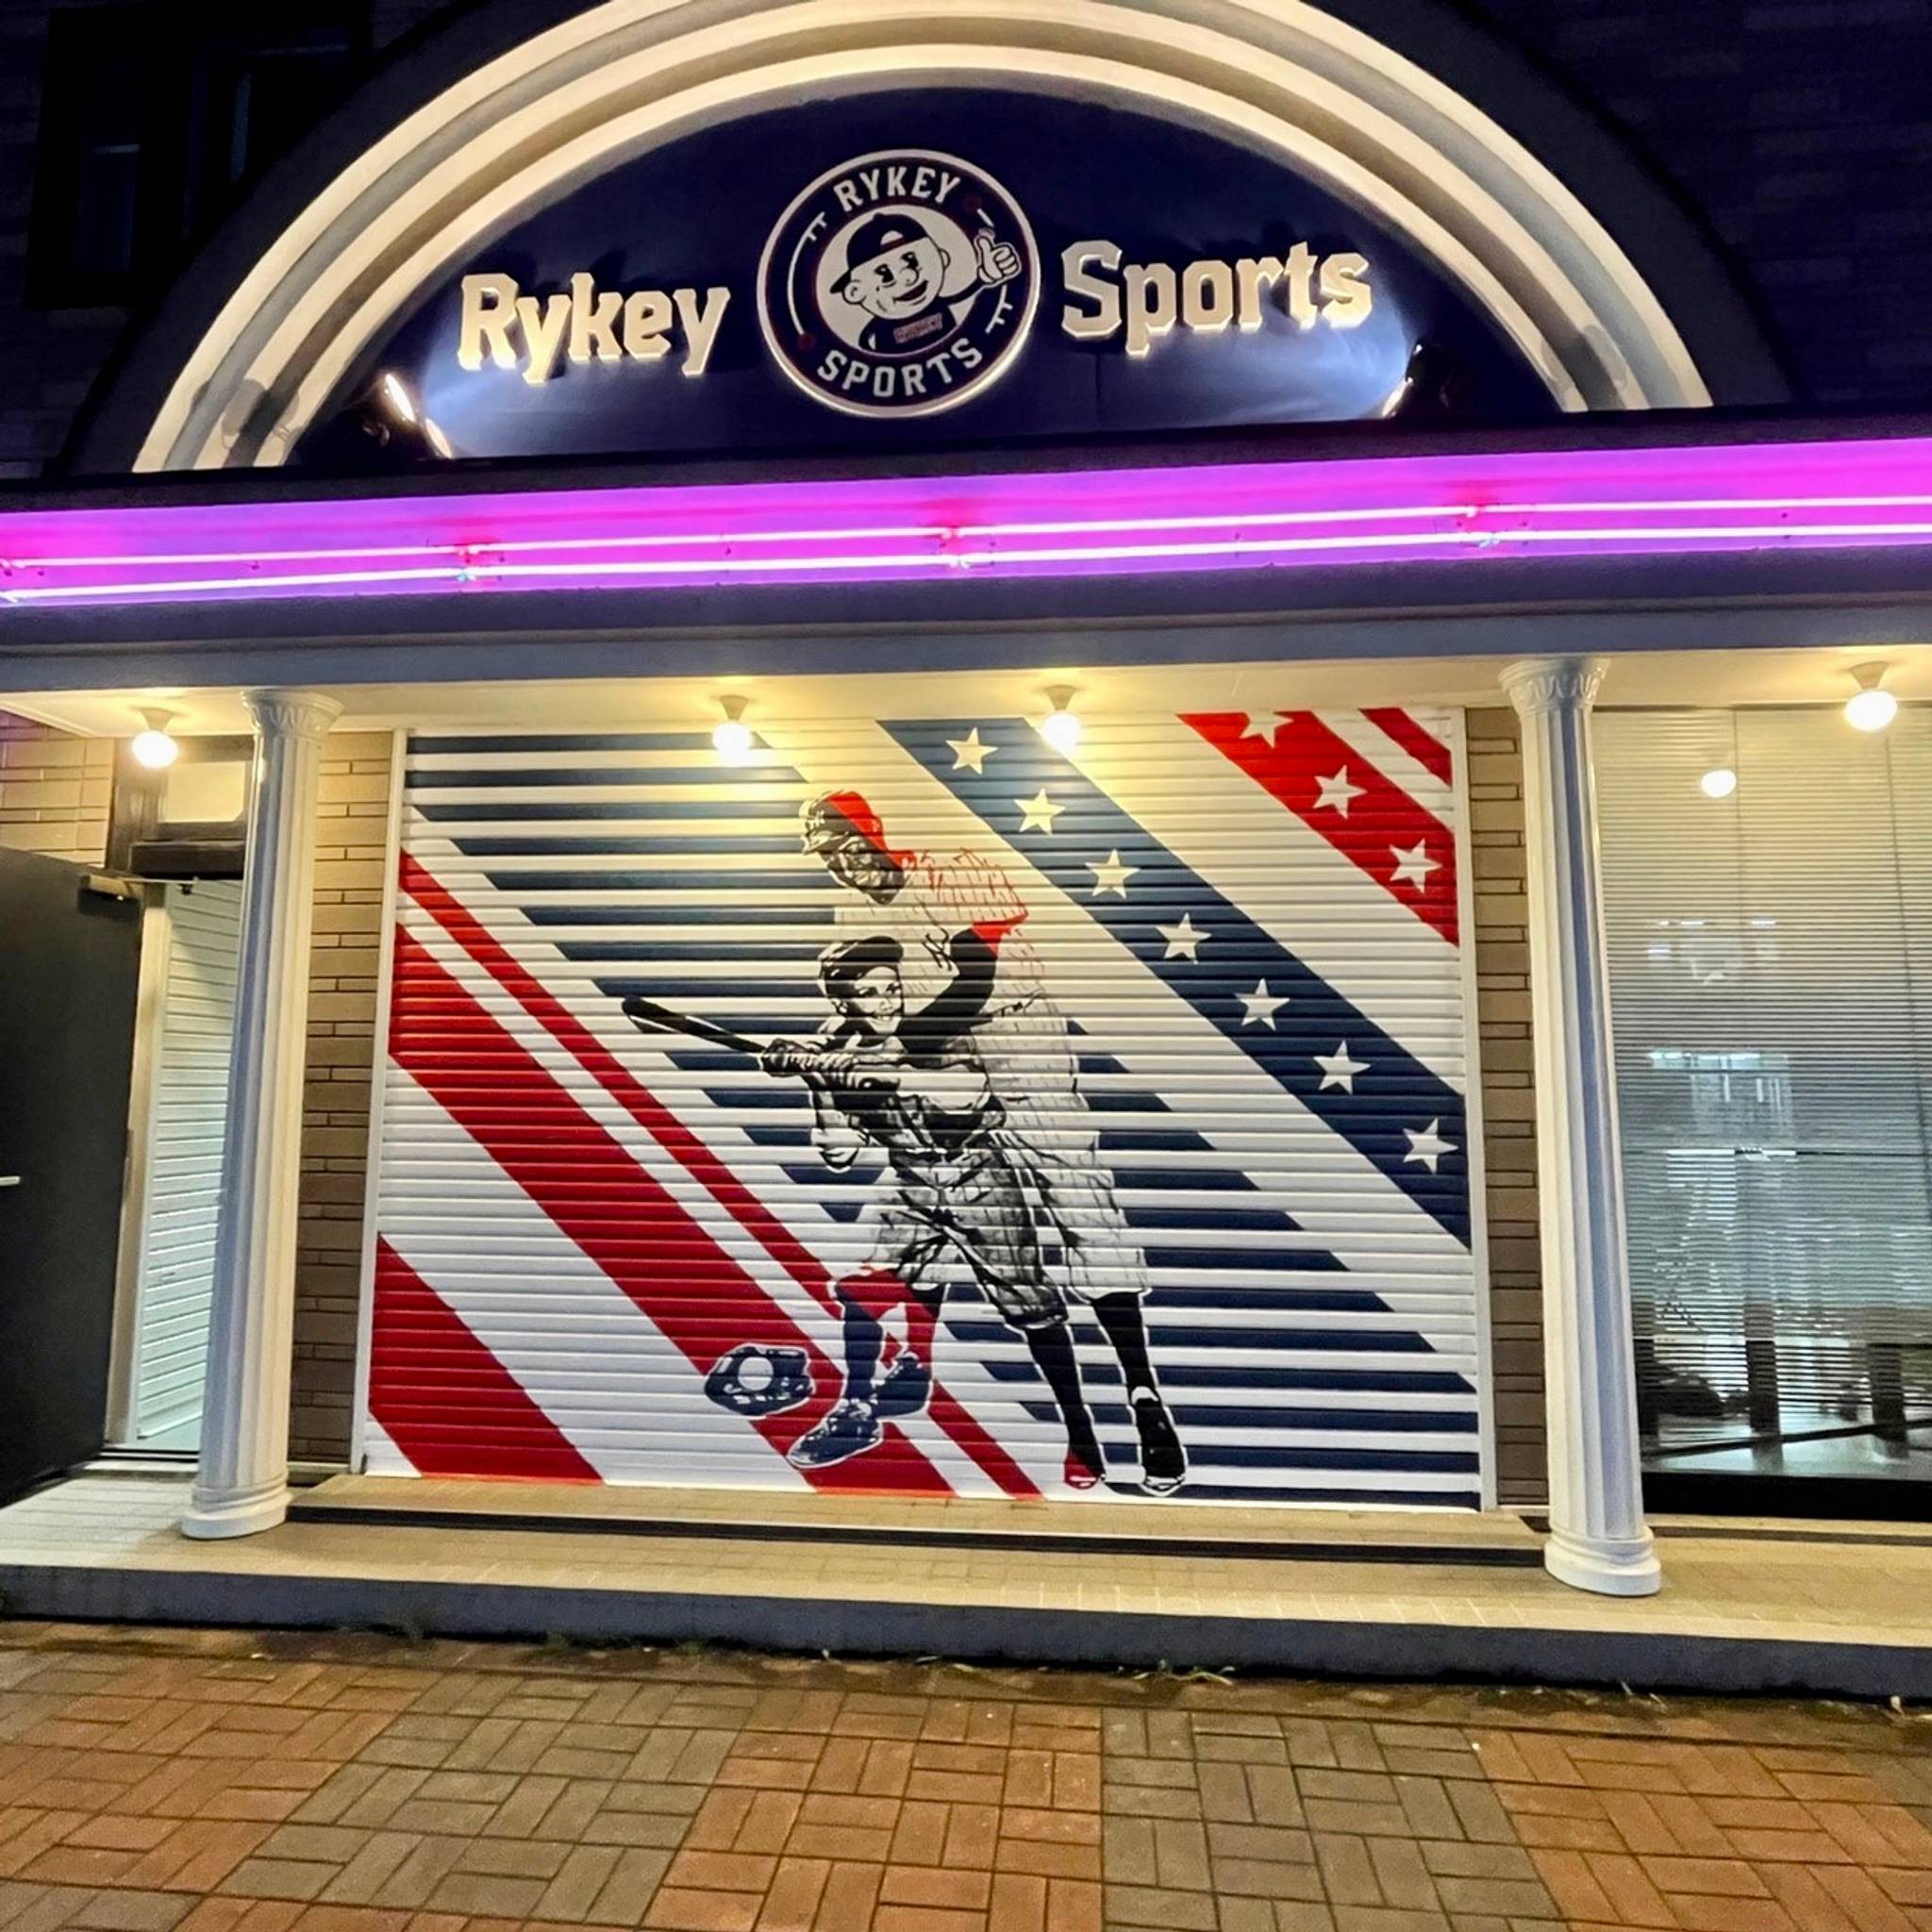 RYKEY SPORTS (Shop the premier baseball equipment and gear) by Eastside Transition